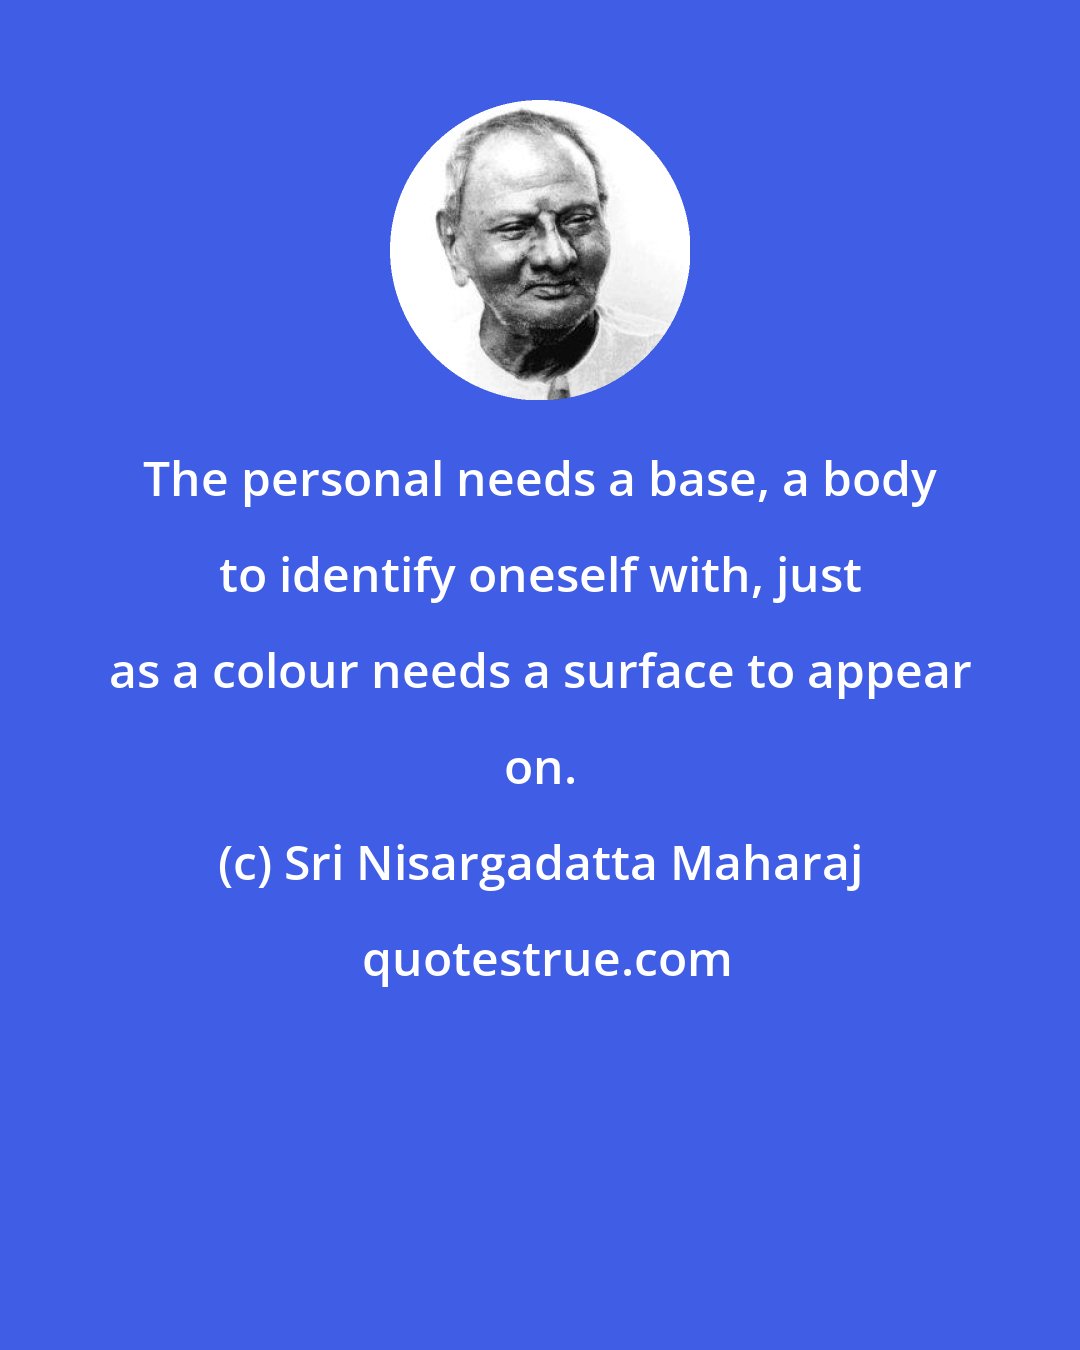 Sri Nisargadatta Maharaj: The personal needs a base, a body to identify oneself with, just as a colour needs a surface to appear on.